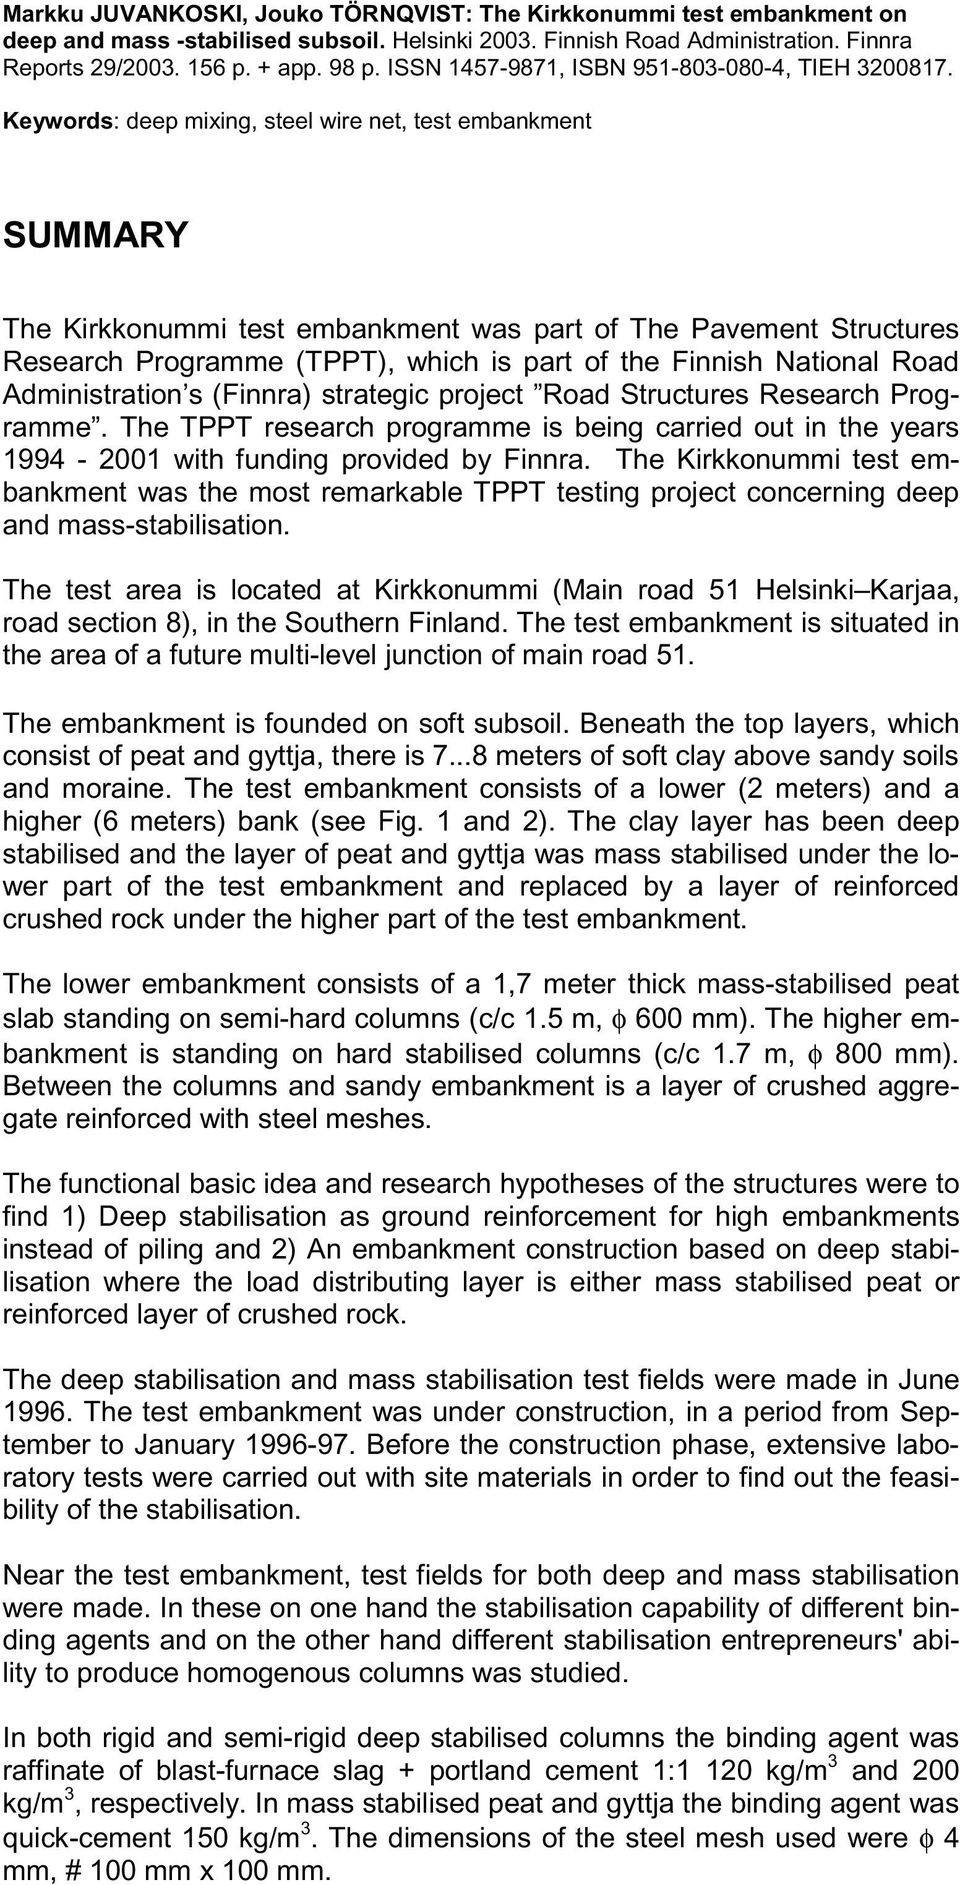 Keywords: deep mixing, steel wire net, test embankment SUMMARY The Kirkkonummi test embankment was part of The Pavement Structures Research Programme (TPPT), which is part of the Finnish National